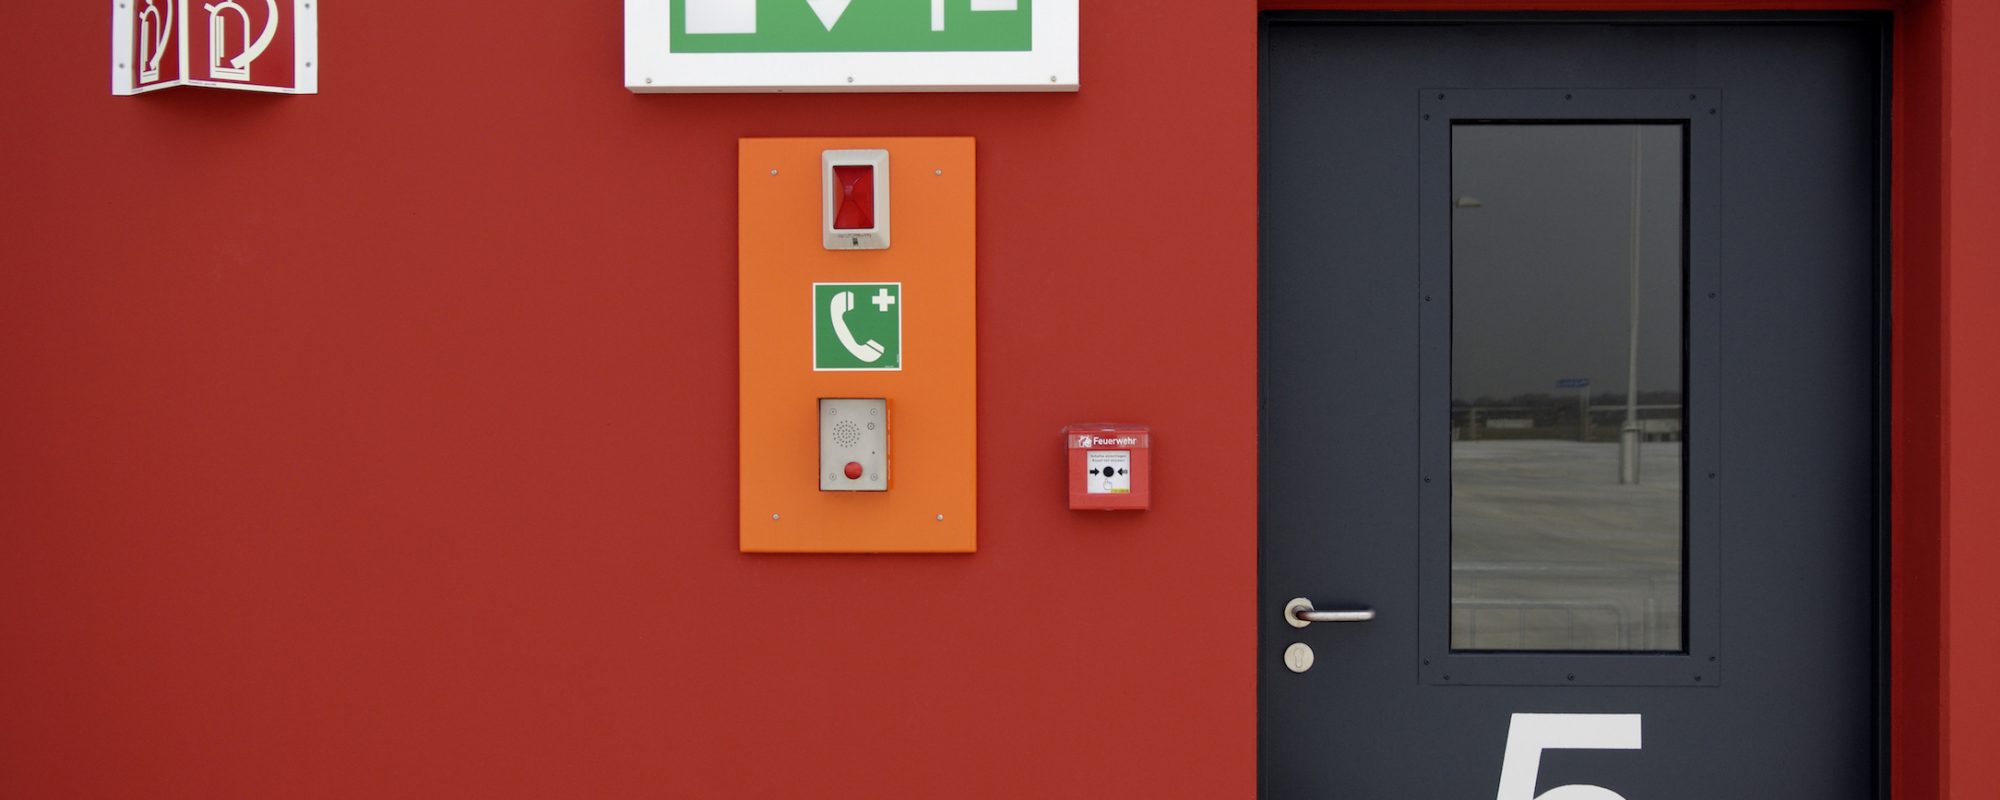 Green emergency exit sign, sos intercom, fire alarm button, pictogram for a fire extinguisher and ablack door with number 5 on a red wall.